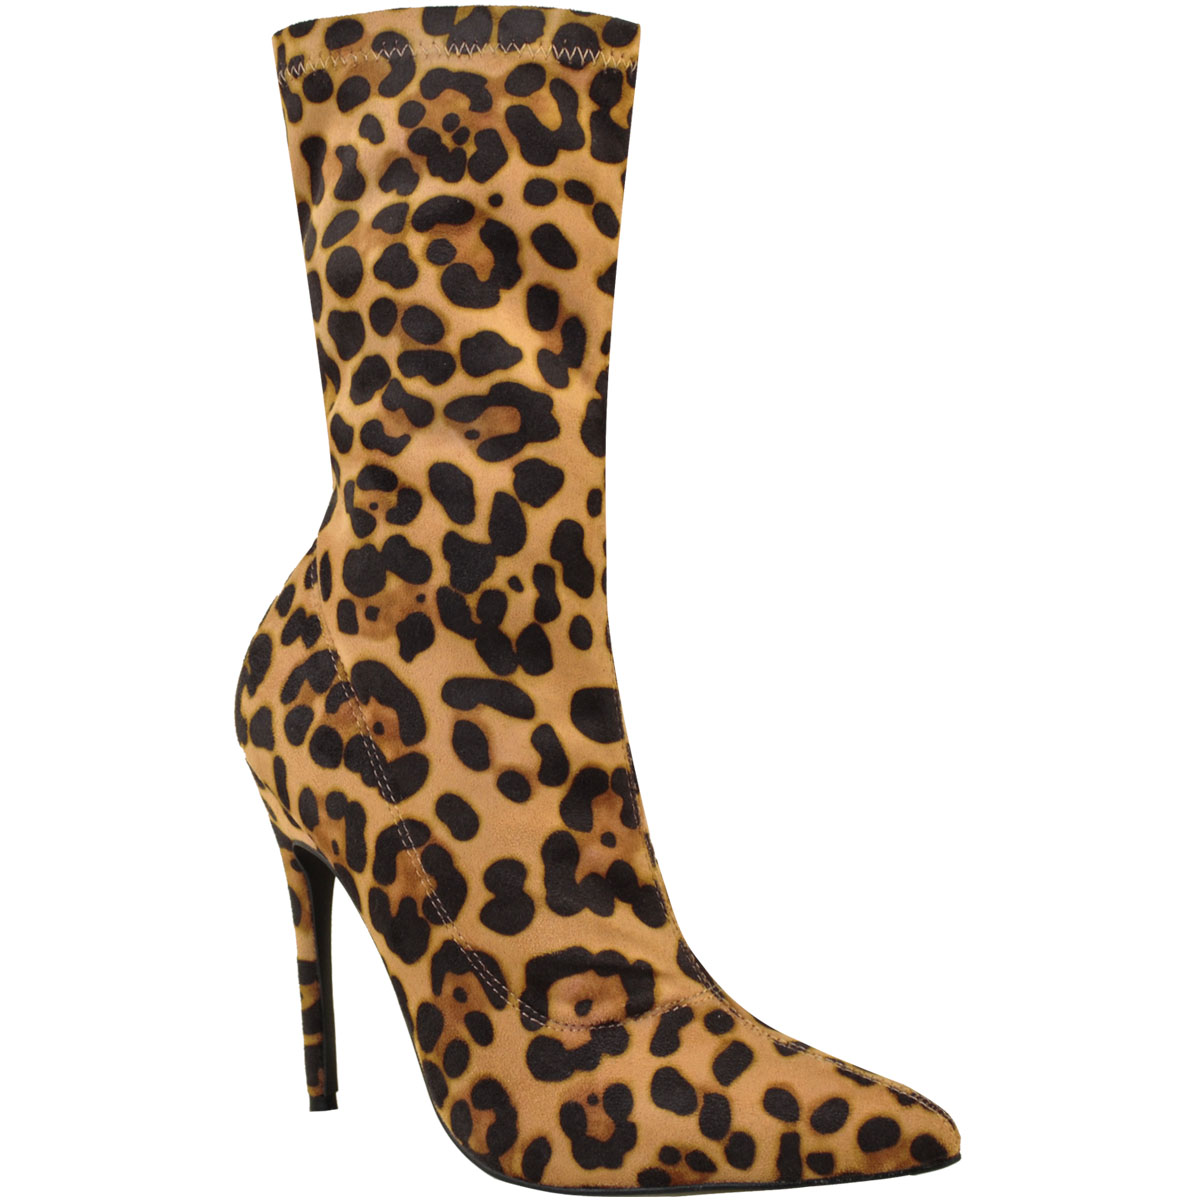 Womens Ladies Leopard Print Ankle Boots Stiletto High Heels Stretch Shoes Size Ebay 